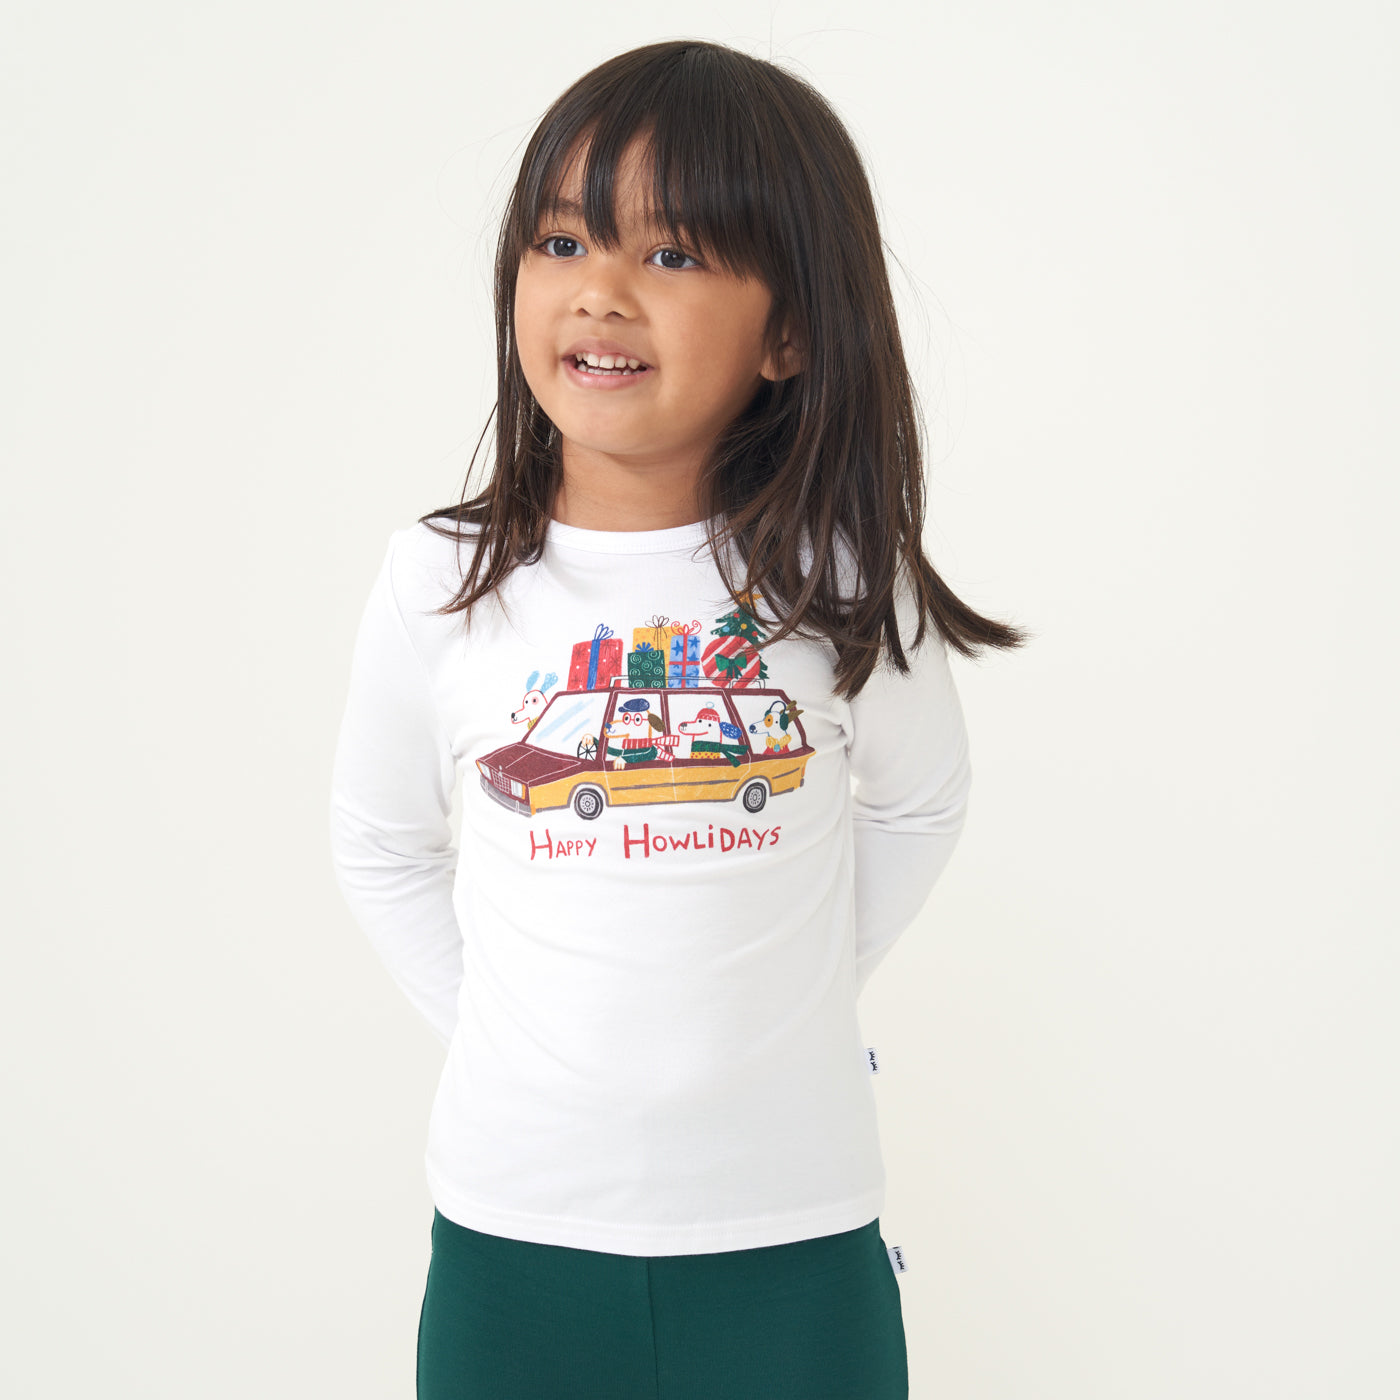 Child wearing a Happy Howlidays graphic tee with her hands behind her back